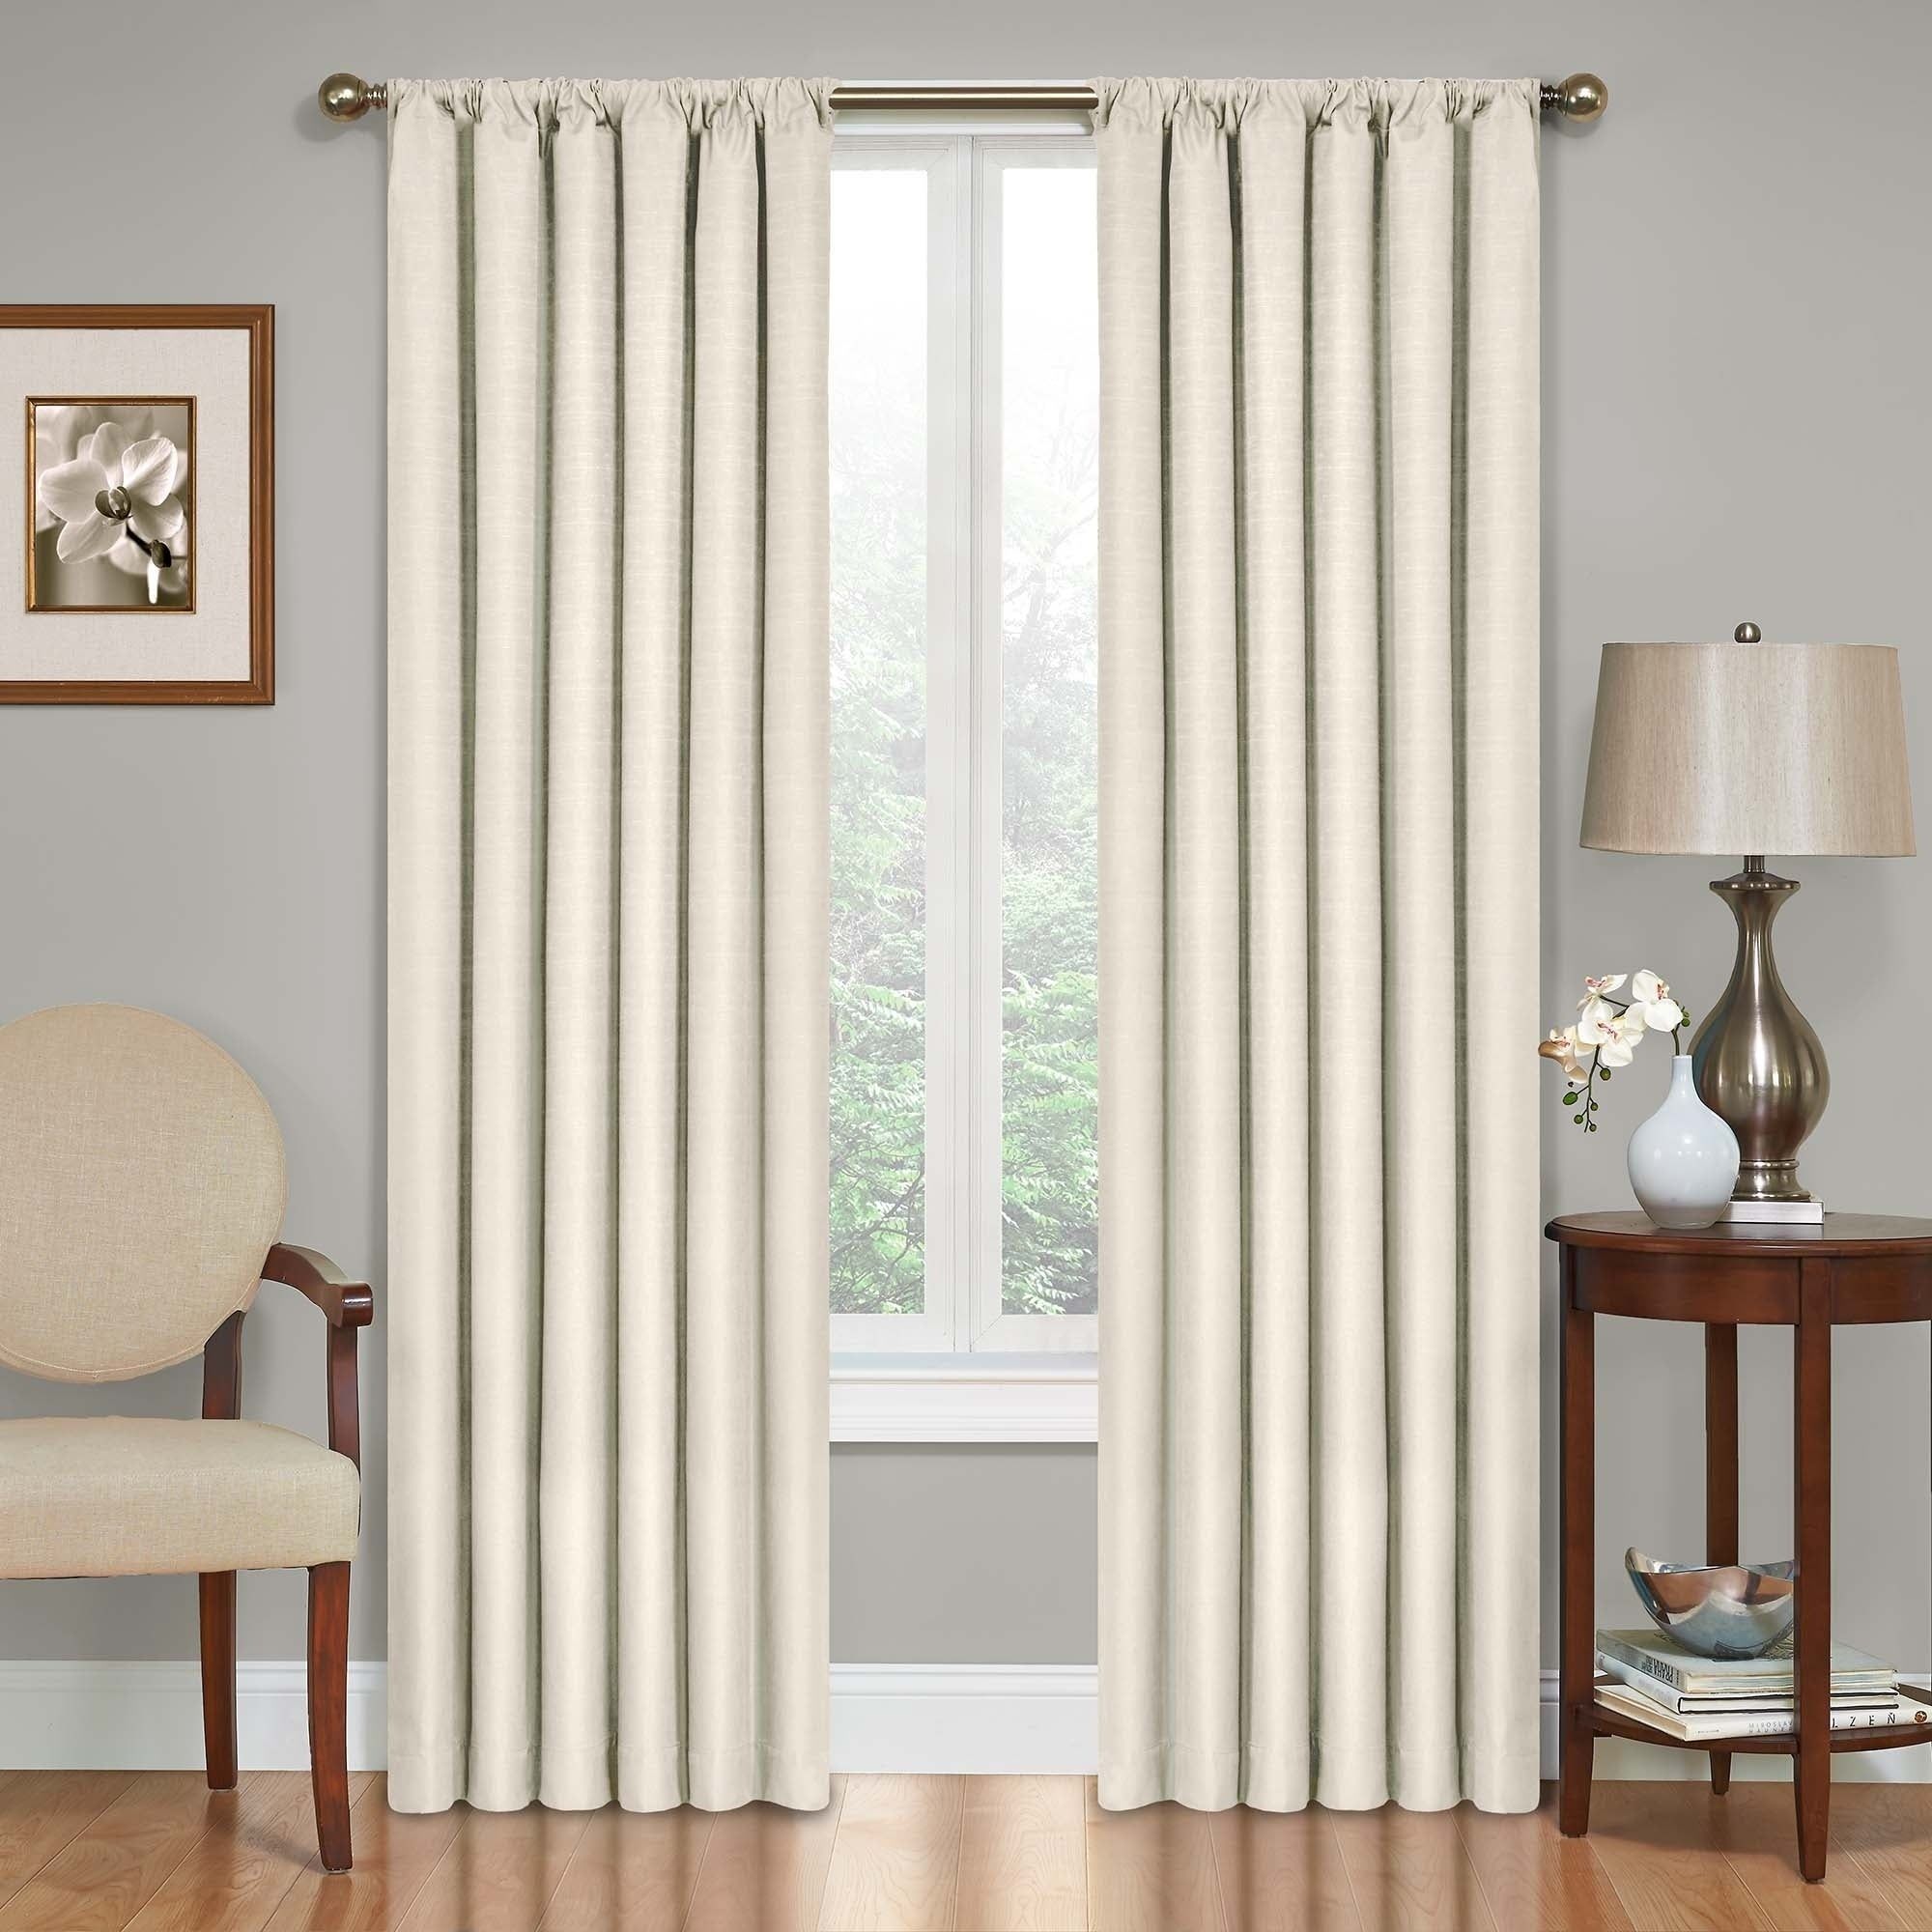 Eclipse Kendall Blackout Window Curtain Panel Inside Eclipse Kendall Blackout Window Curtain Panels (View 4 of 20)